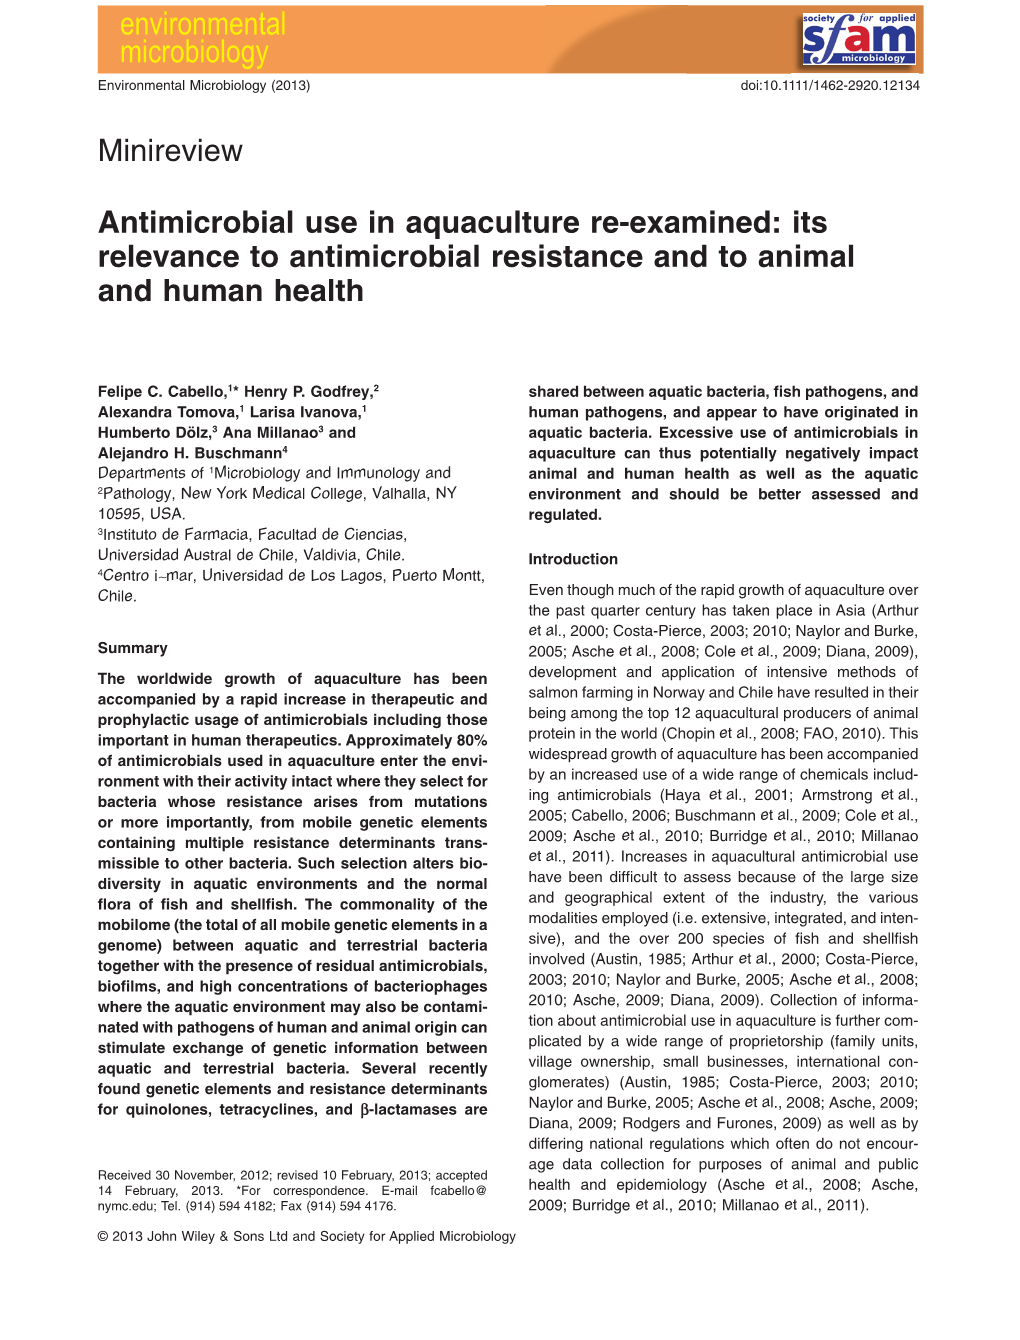 Antimicrobial Use in Aquaculture Reexamined